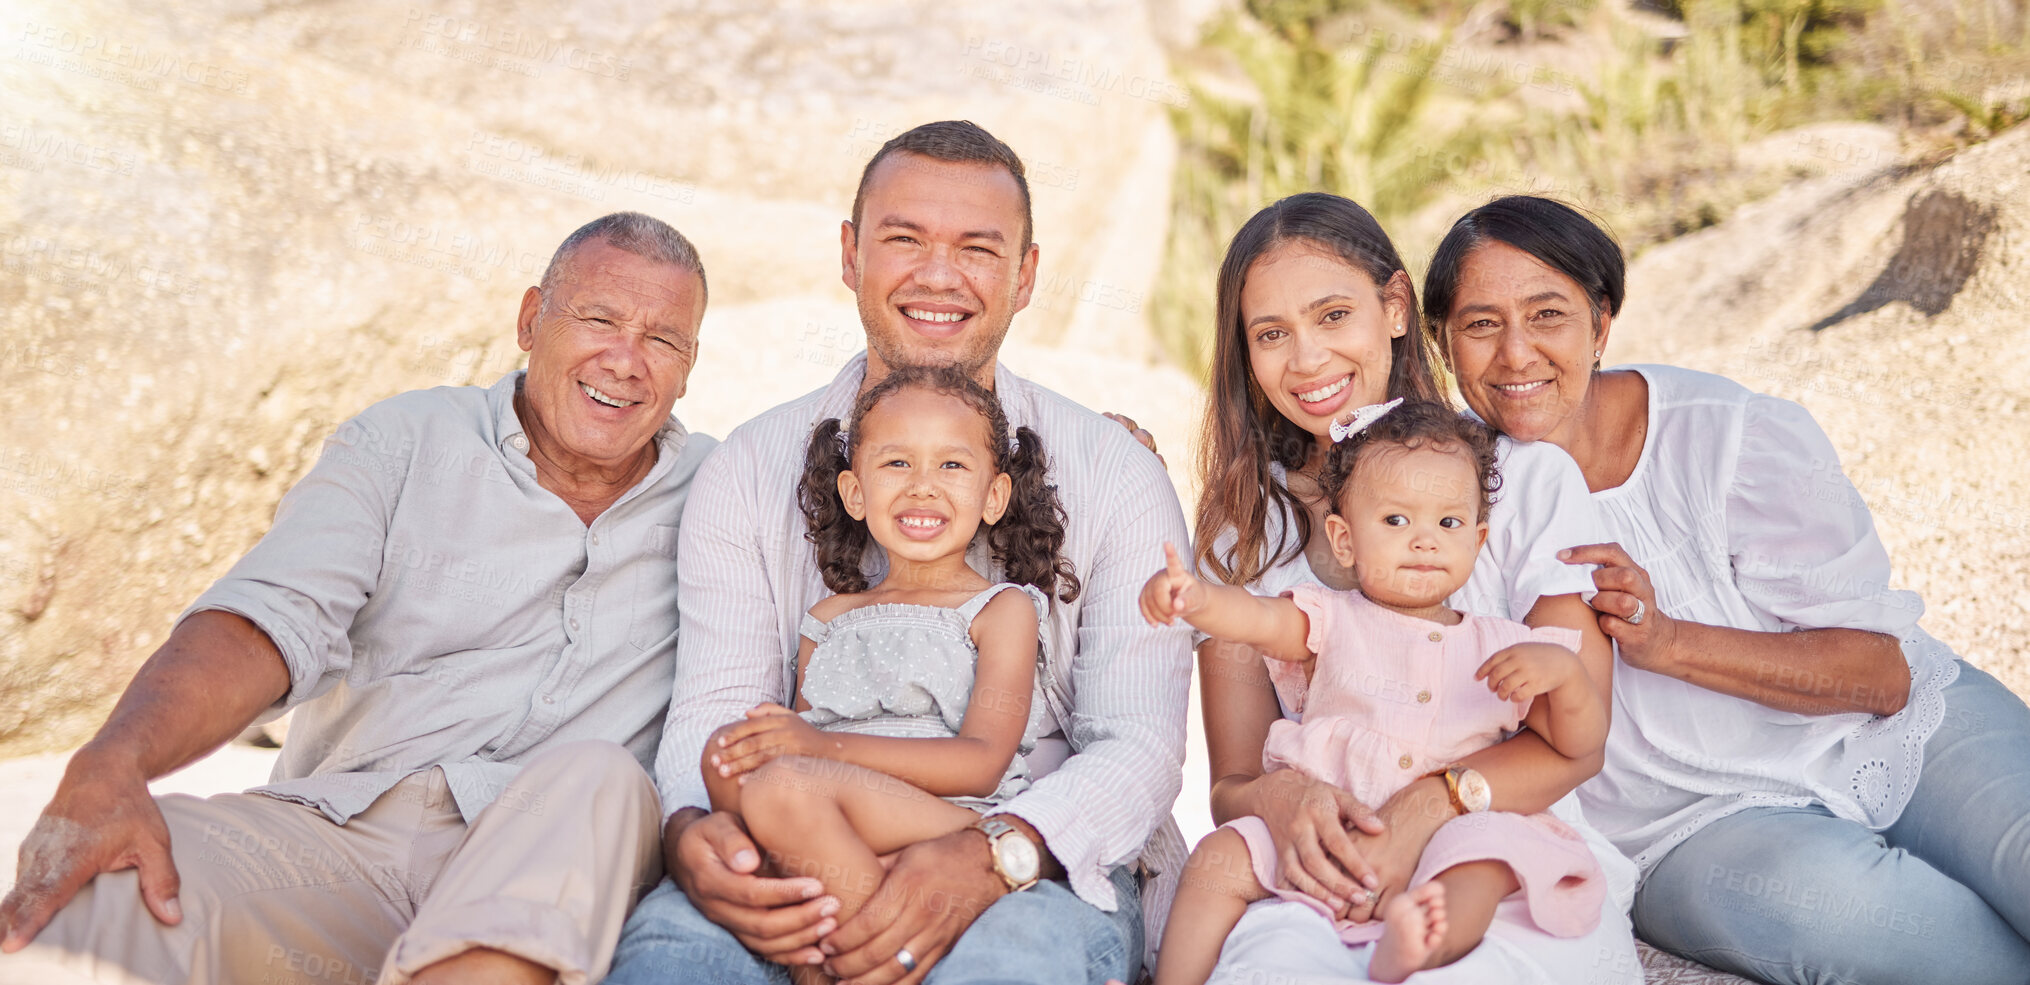 Buy stock photo Portrait of a smiling mixed race family with little girls sitting  together at the beach. Adorable little kids bonding with their parents and grandparents while having a picnic at a park or garden